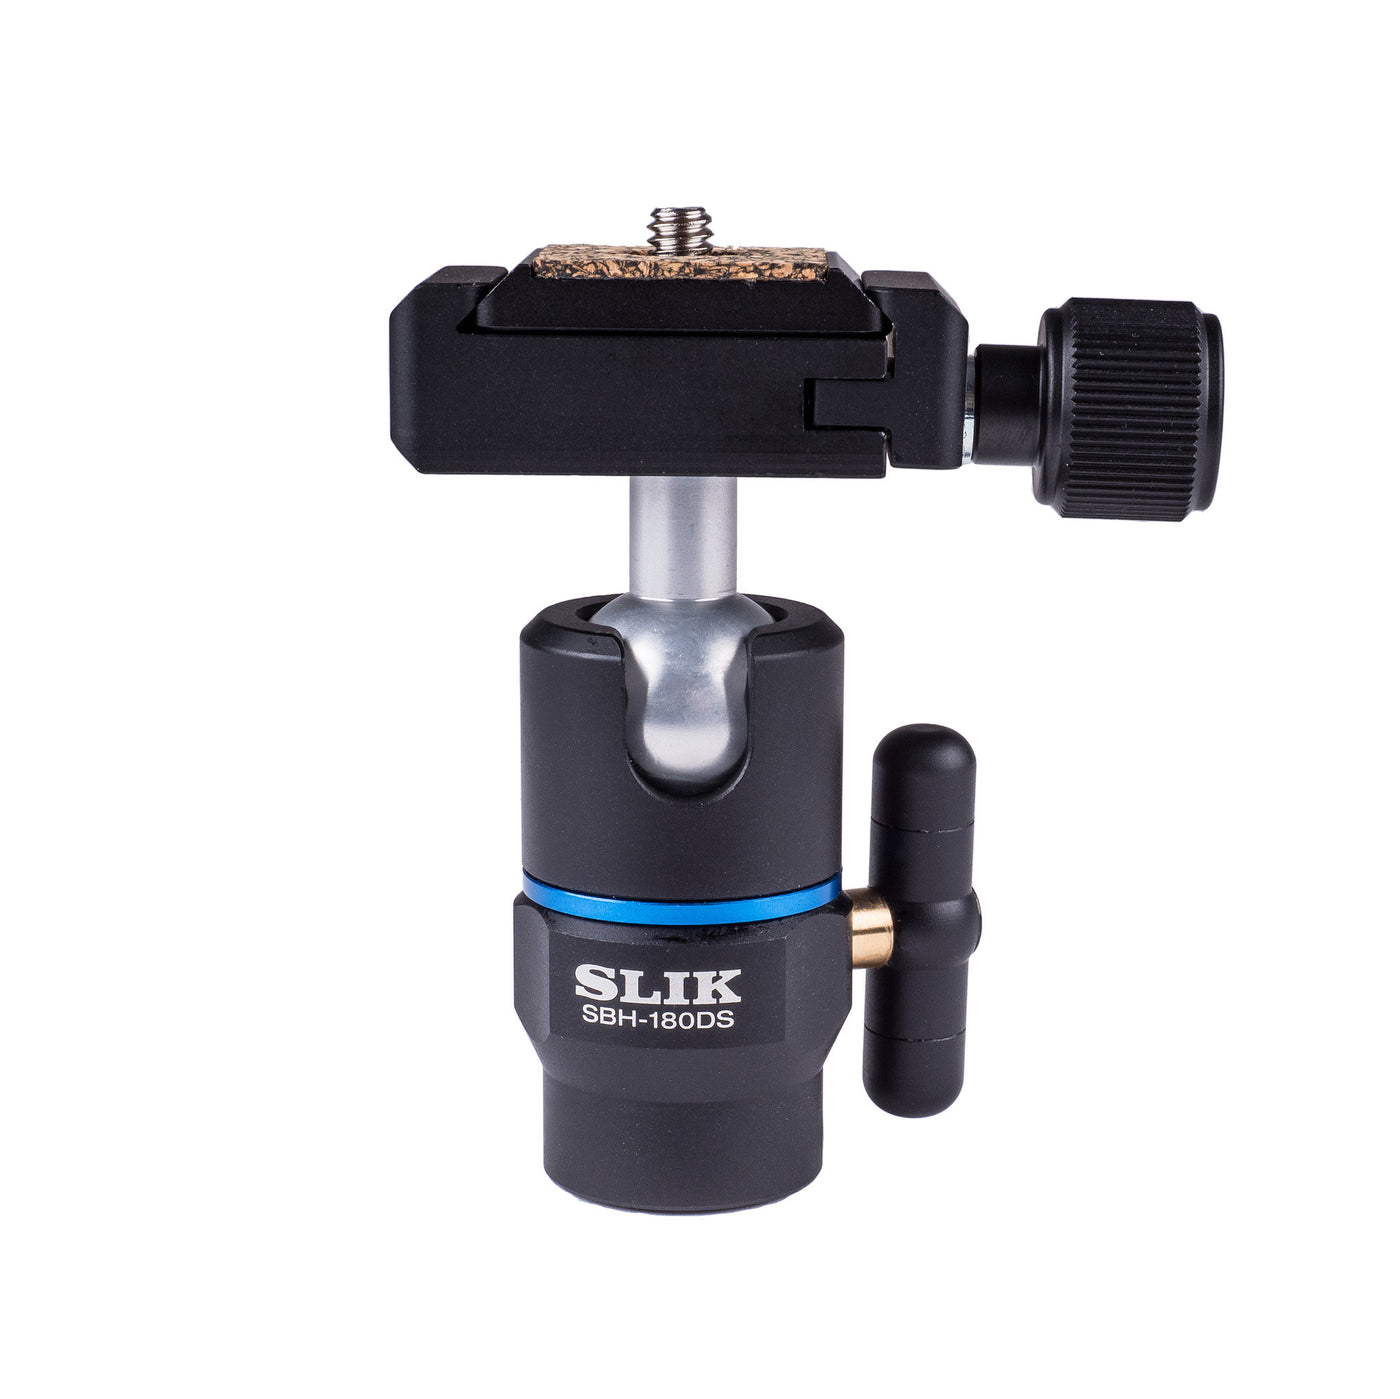 SBH-180 DS - Compact Ball Head with Arca Quick Release